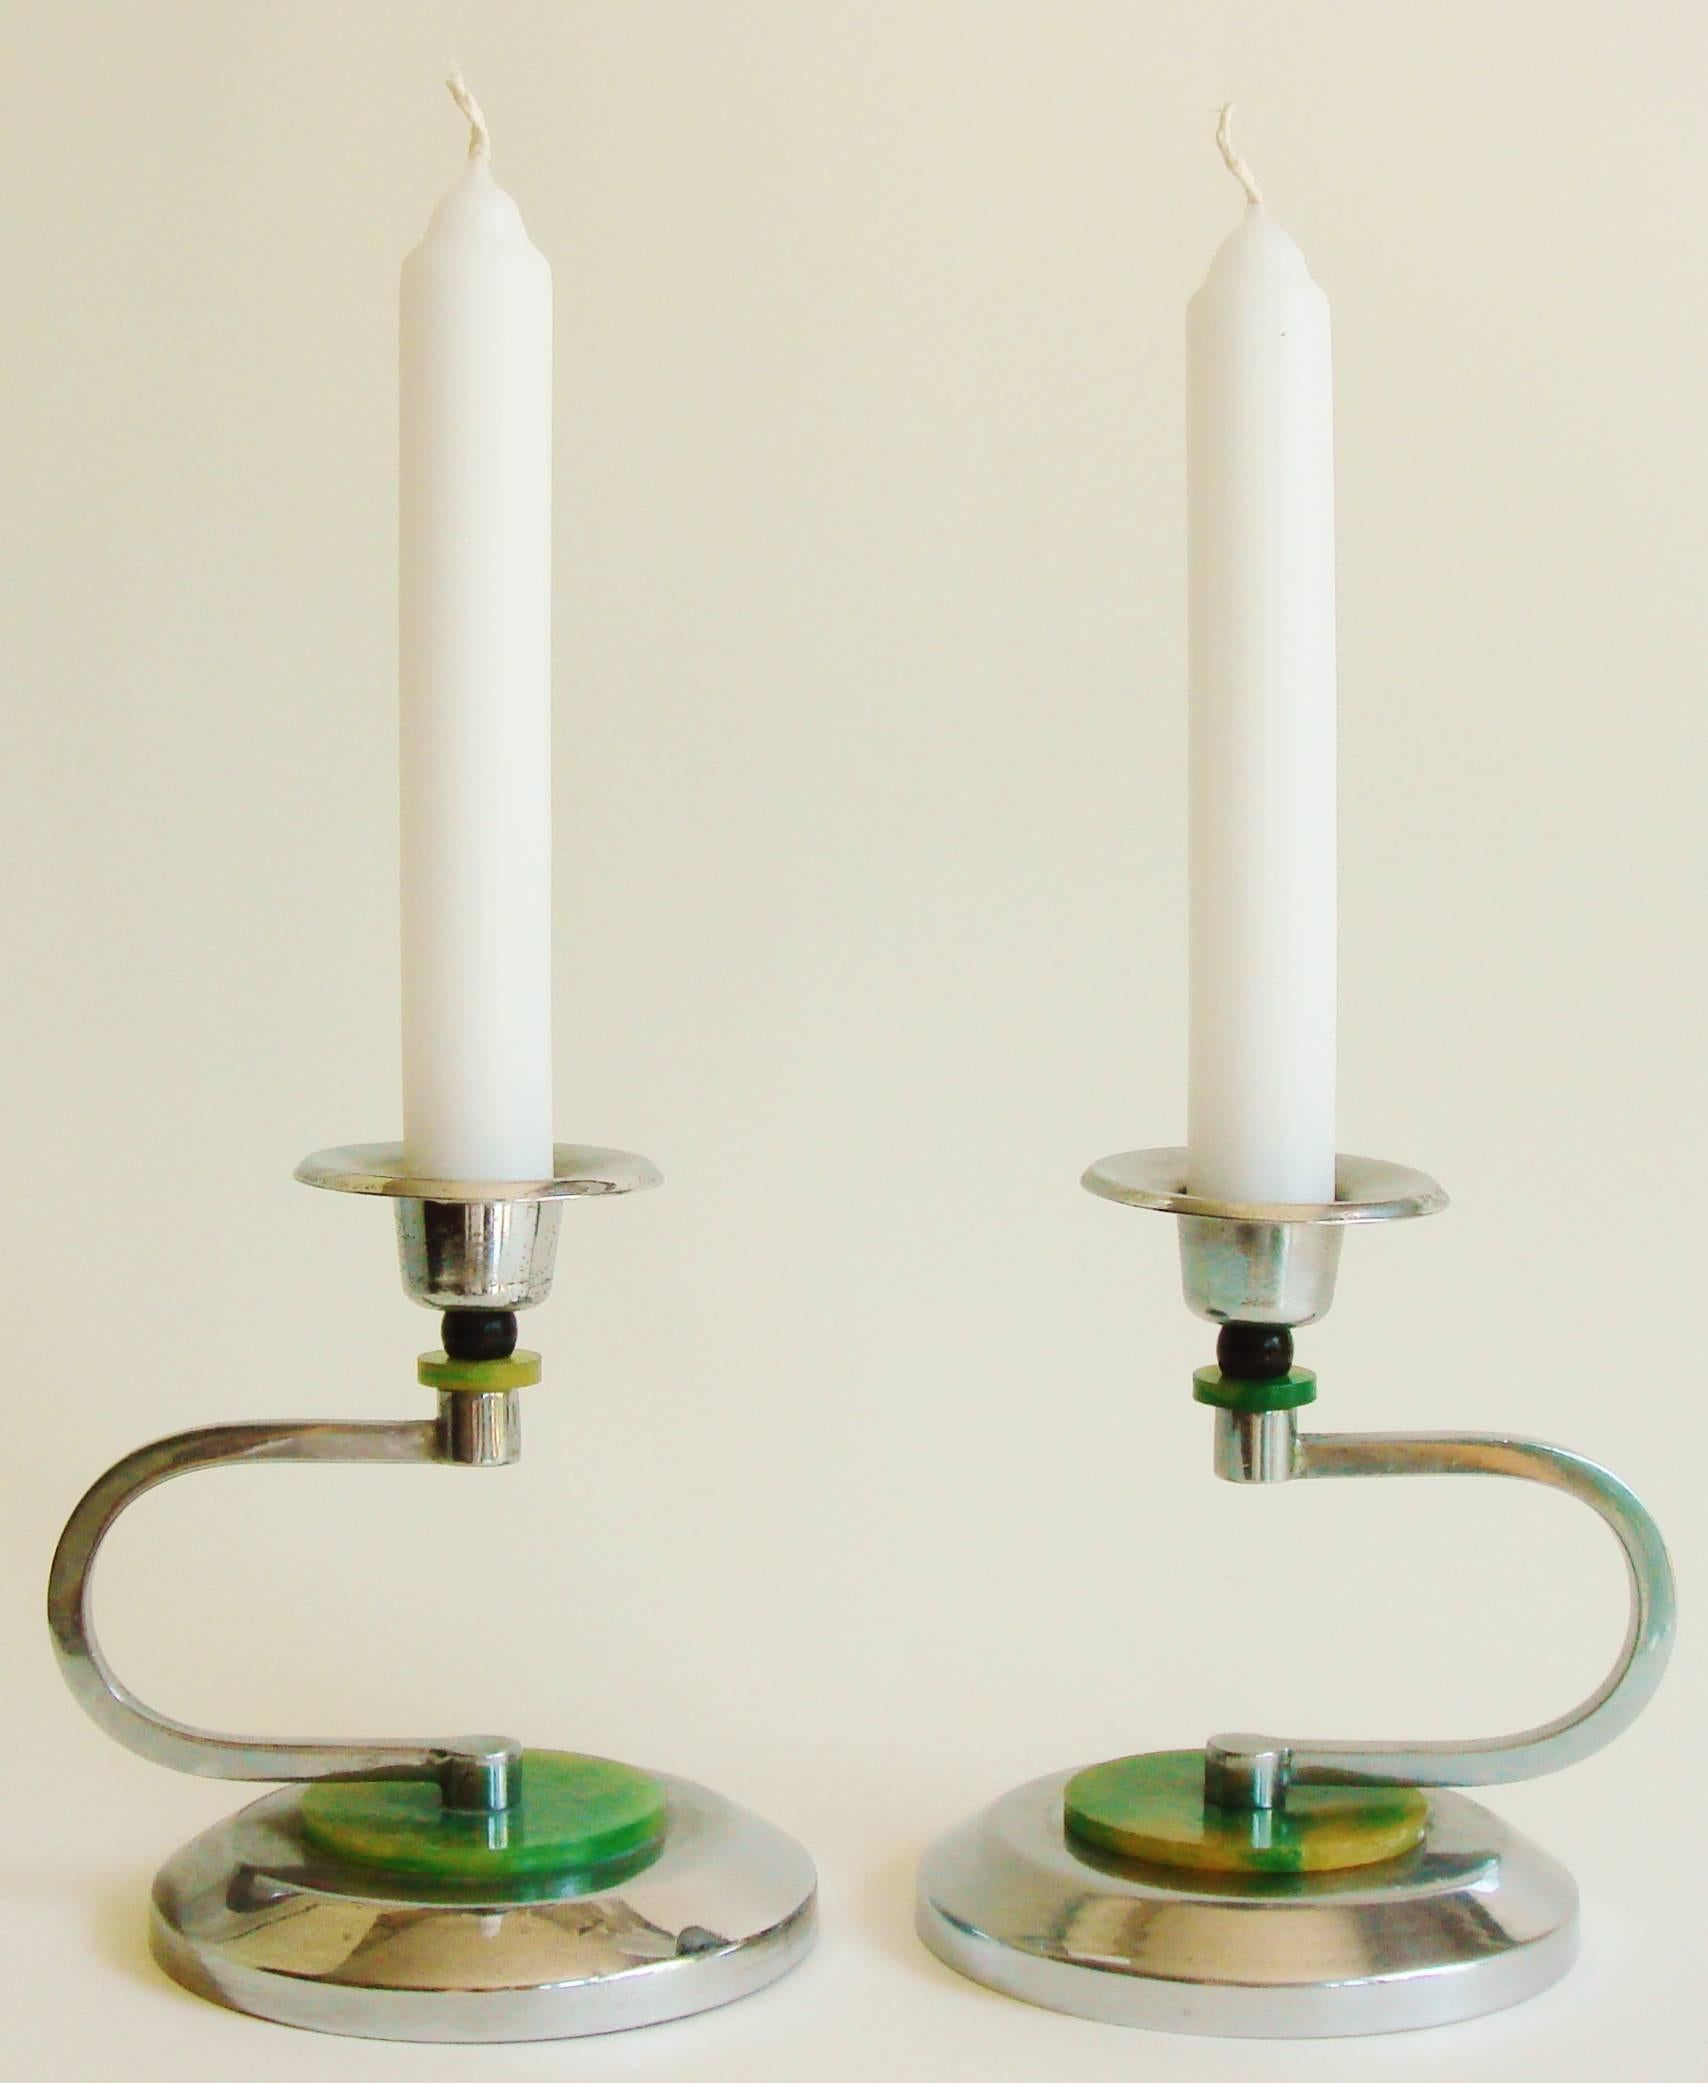 This pair of English Art Deco candlesticks feature circular chrome beveled edge weighted bases that are each capped with a bakelite disk marbled in green and yellow. The horizontal 